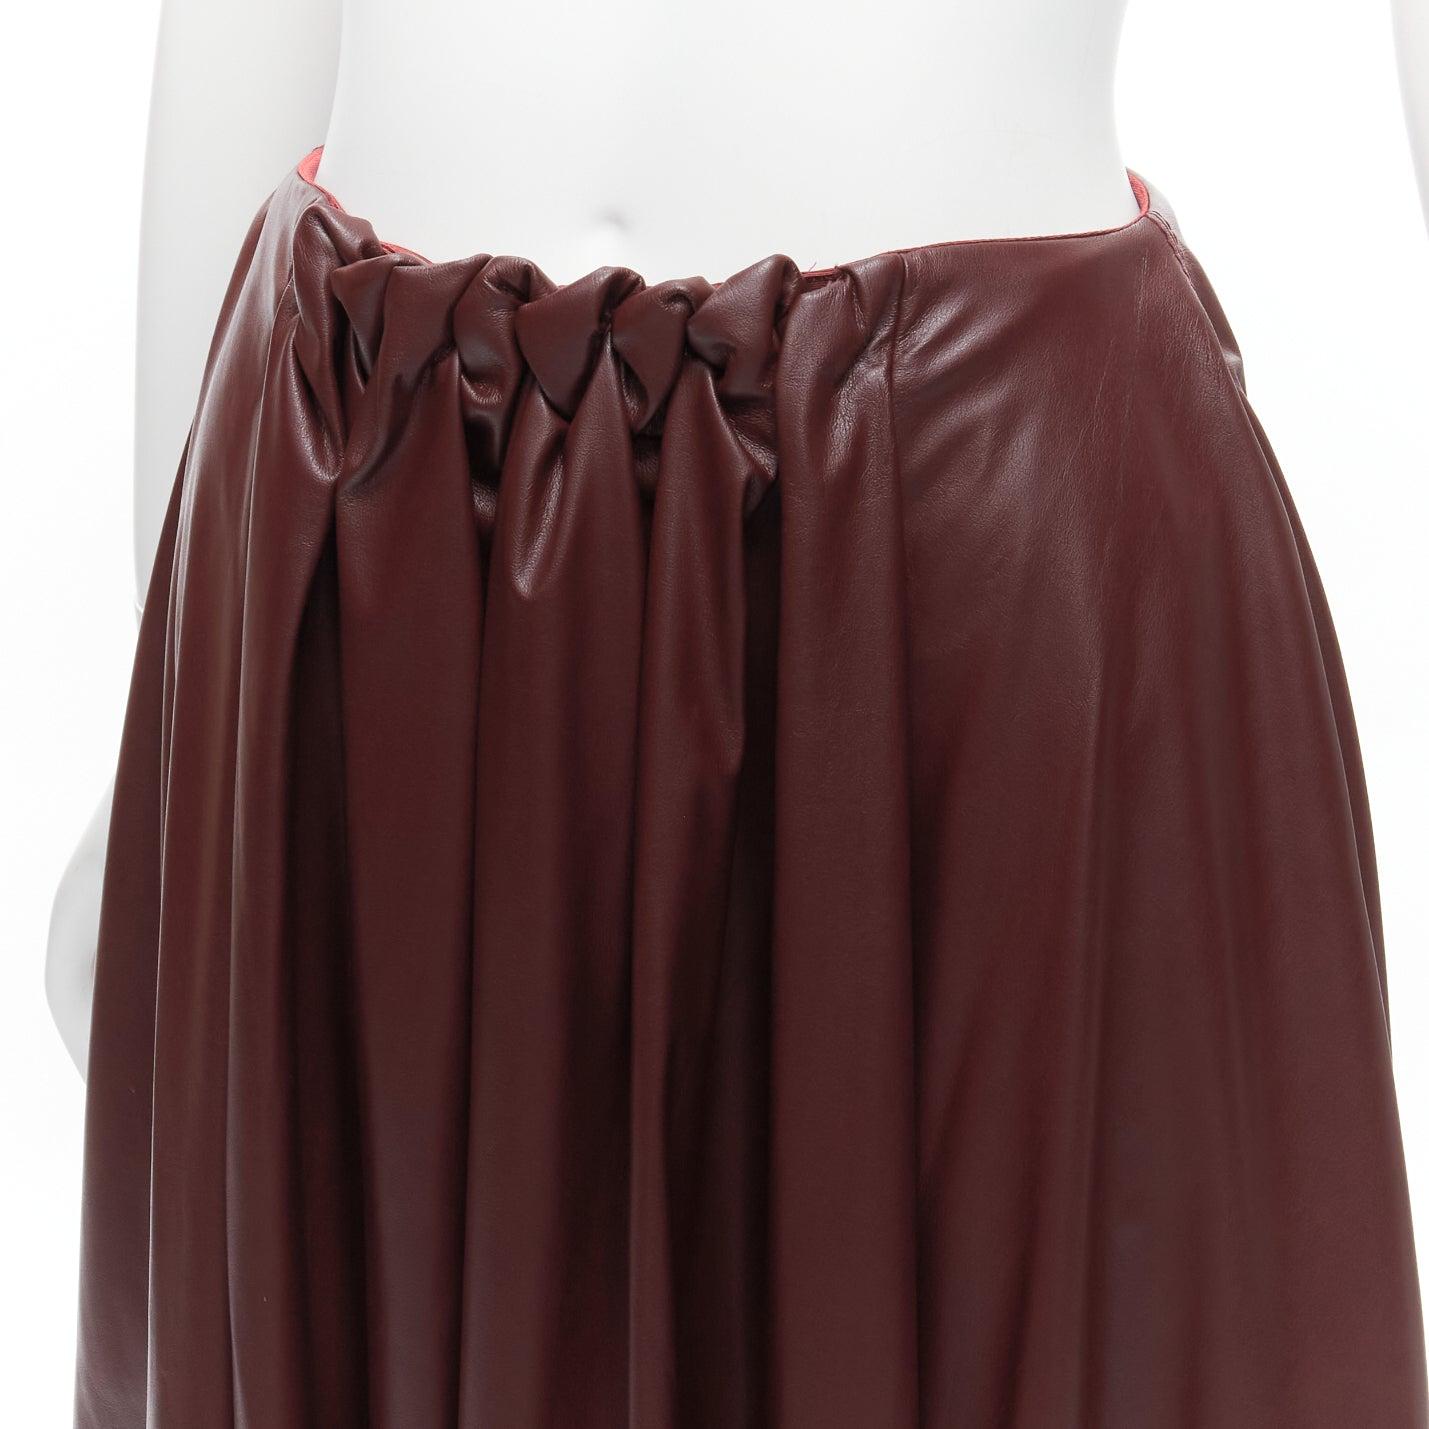 ROKSANDA burgundy faux leather wool lined ruched waist A-line midi skirt UK8 S
Reference: SNKO/A00302
Brand: Roksanda
Material: Faux Leather
Color: Burgundy
Pattern: Solid
Closure: Zip
Lining: Burgundy Wool
Extra Details: Zip back.
Made in: